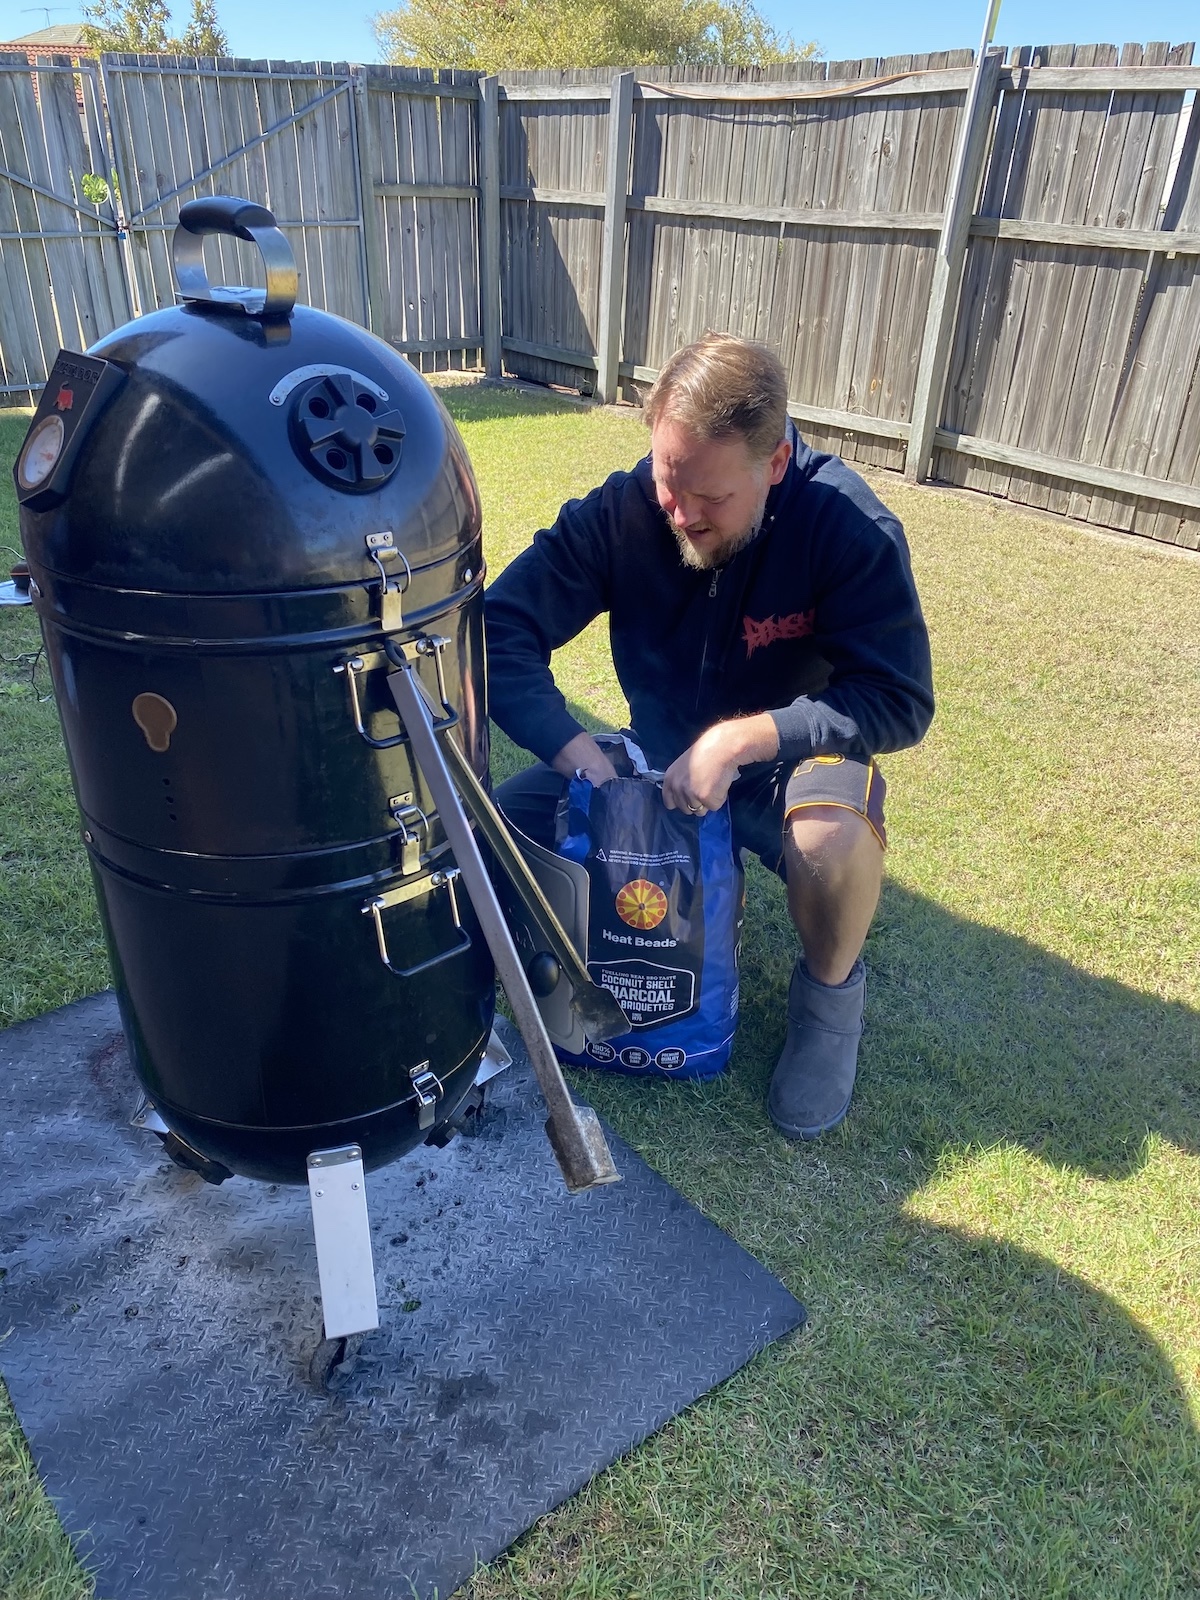 Simon adding charcoal to the bullet smoker in the backyard